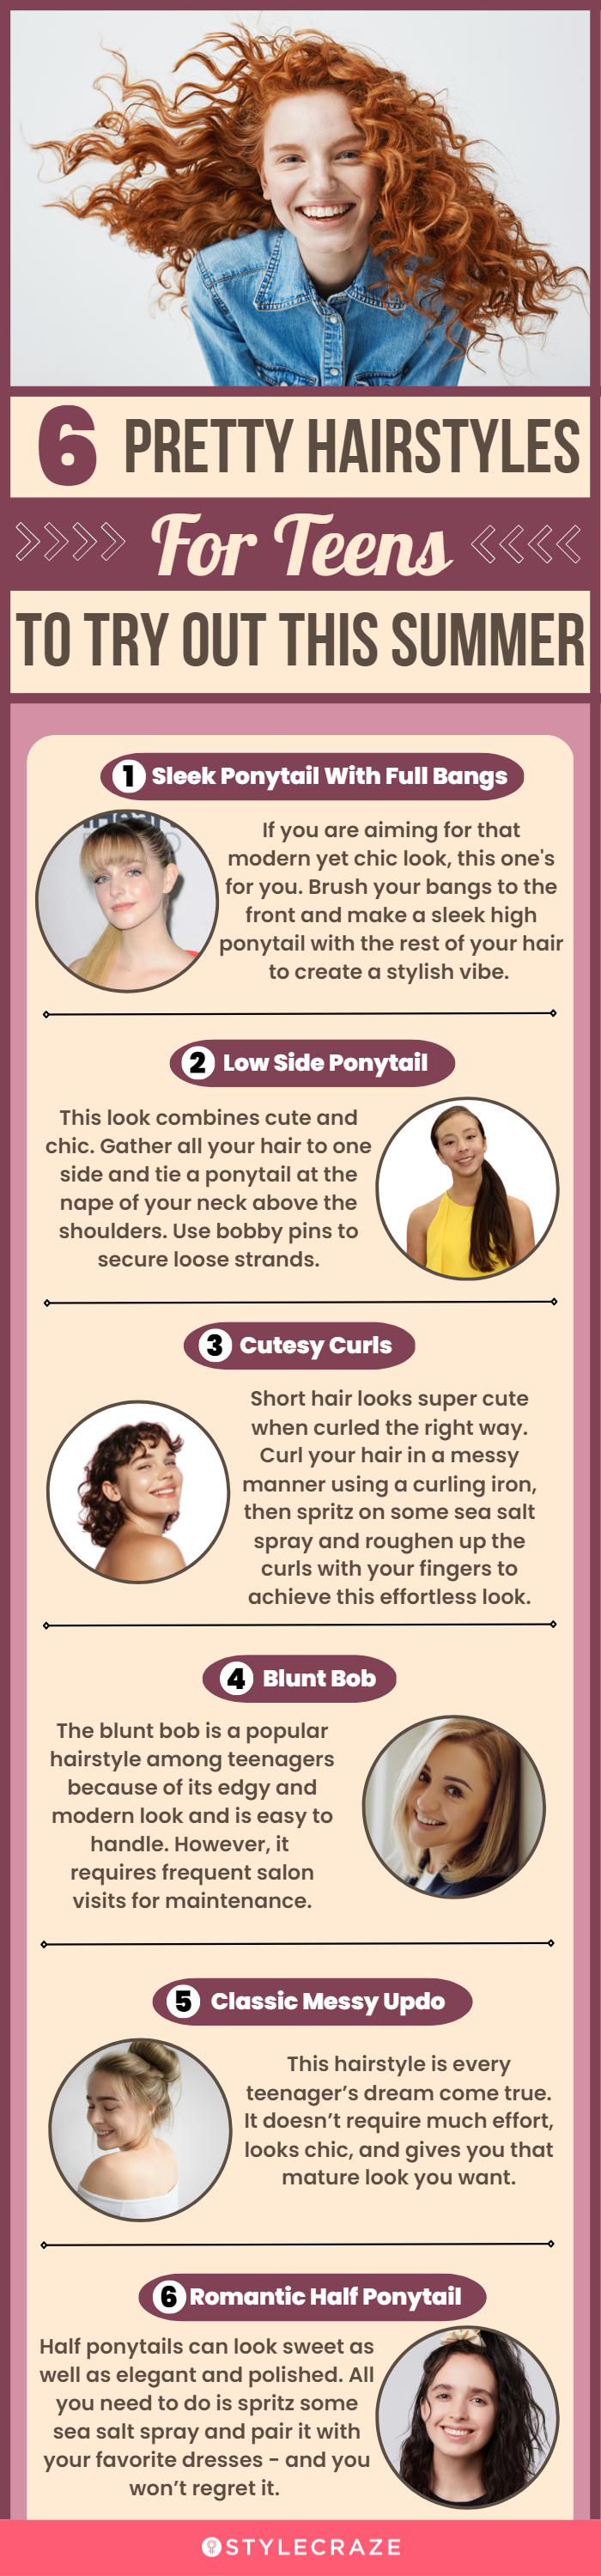 6 pretty hairstyles for teens to try out this summer (infographic)